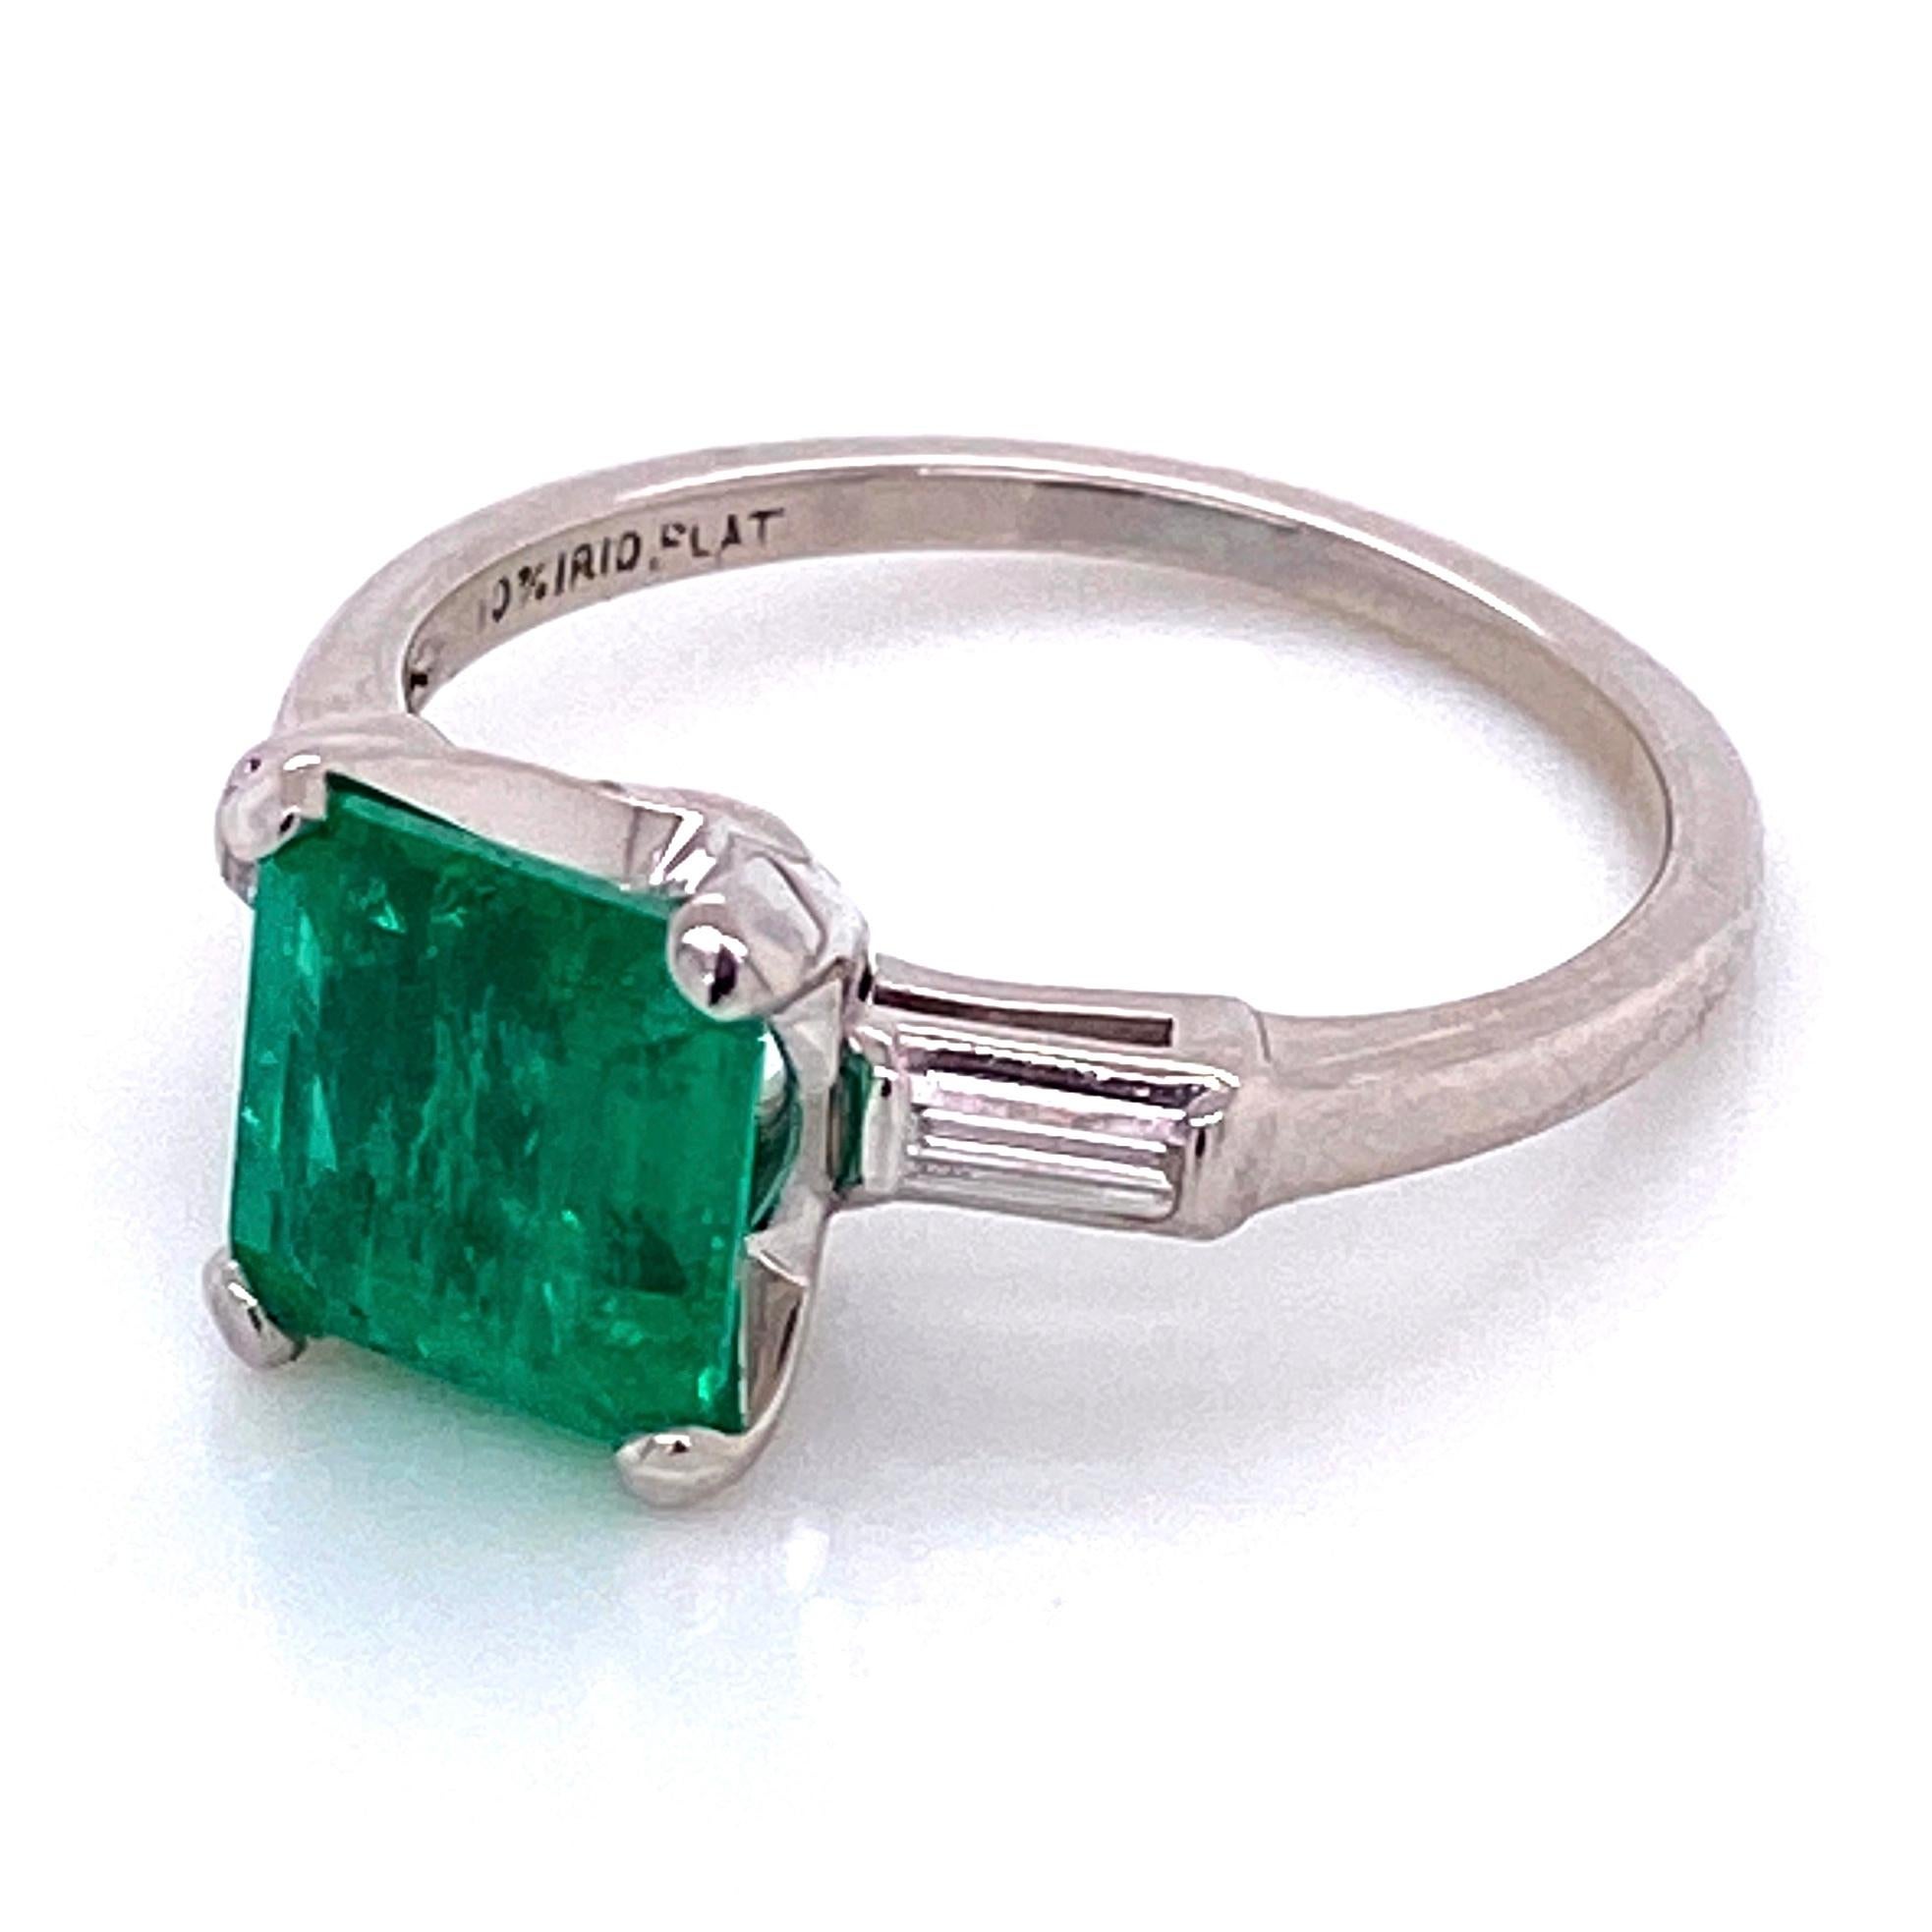 Classic and finely detailed Emerald and Diamond Ring, center securely set with a 1.93 Carat Square Emerald Cut Vibrant Green Emerald and Baguette Diamonds weighing .25 total carat weight on either side. Hand crafted Platinum mounting. Ring size 7.